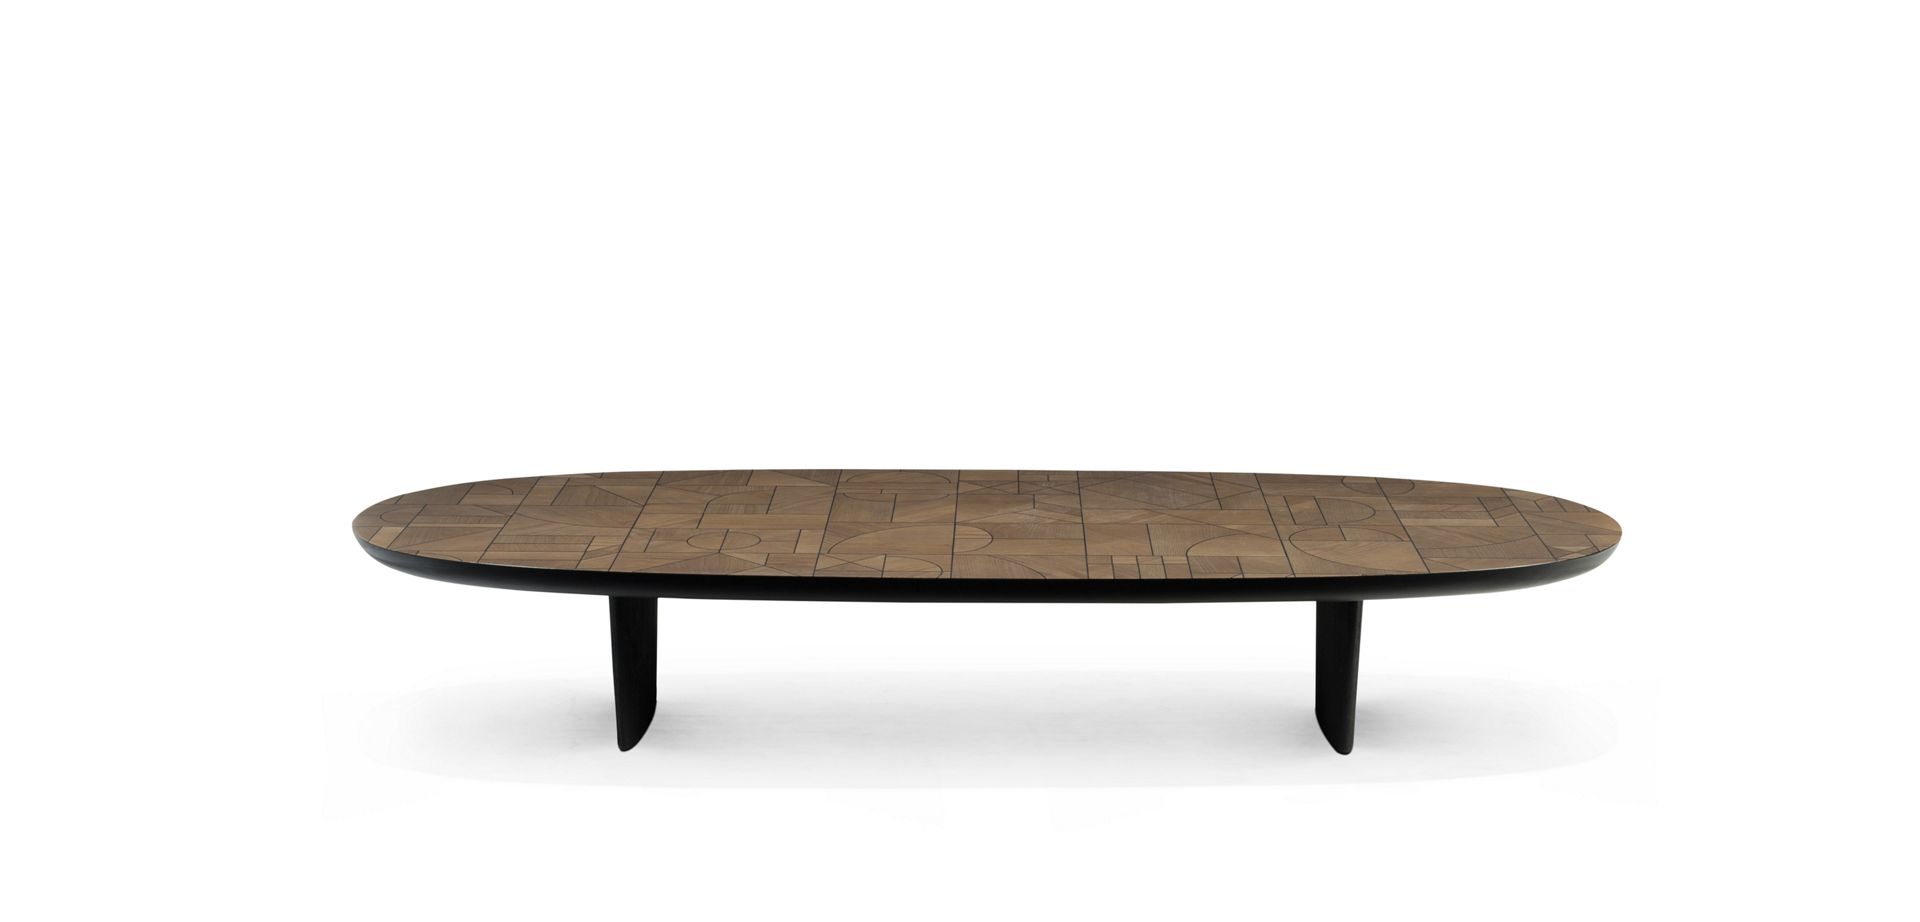 Metiers oval table